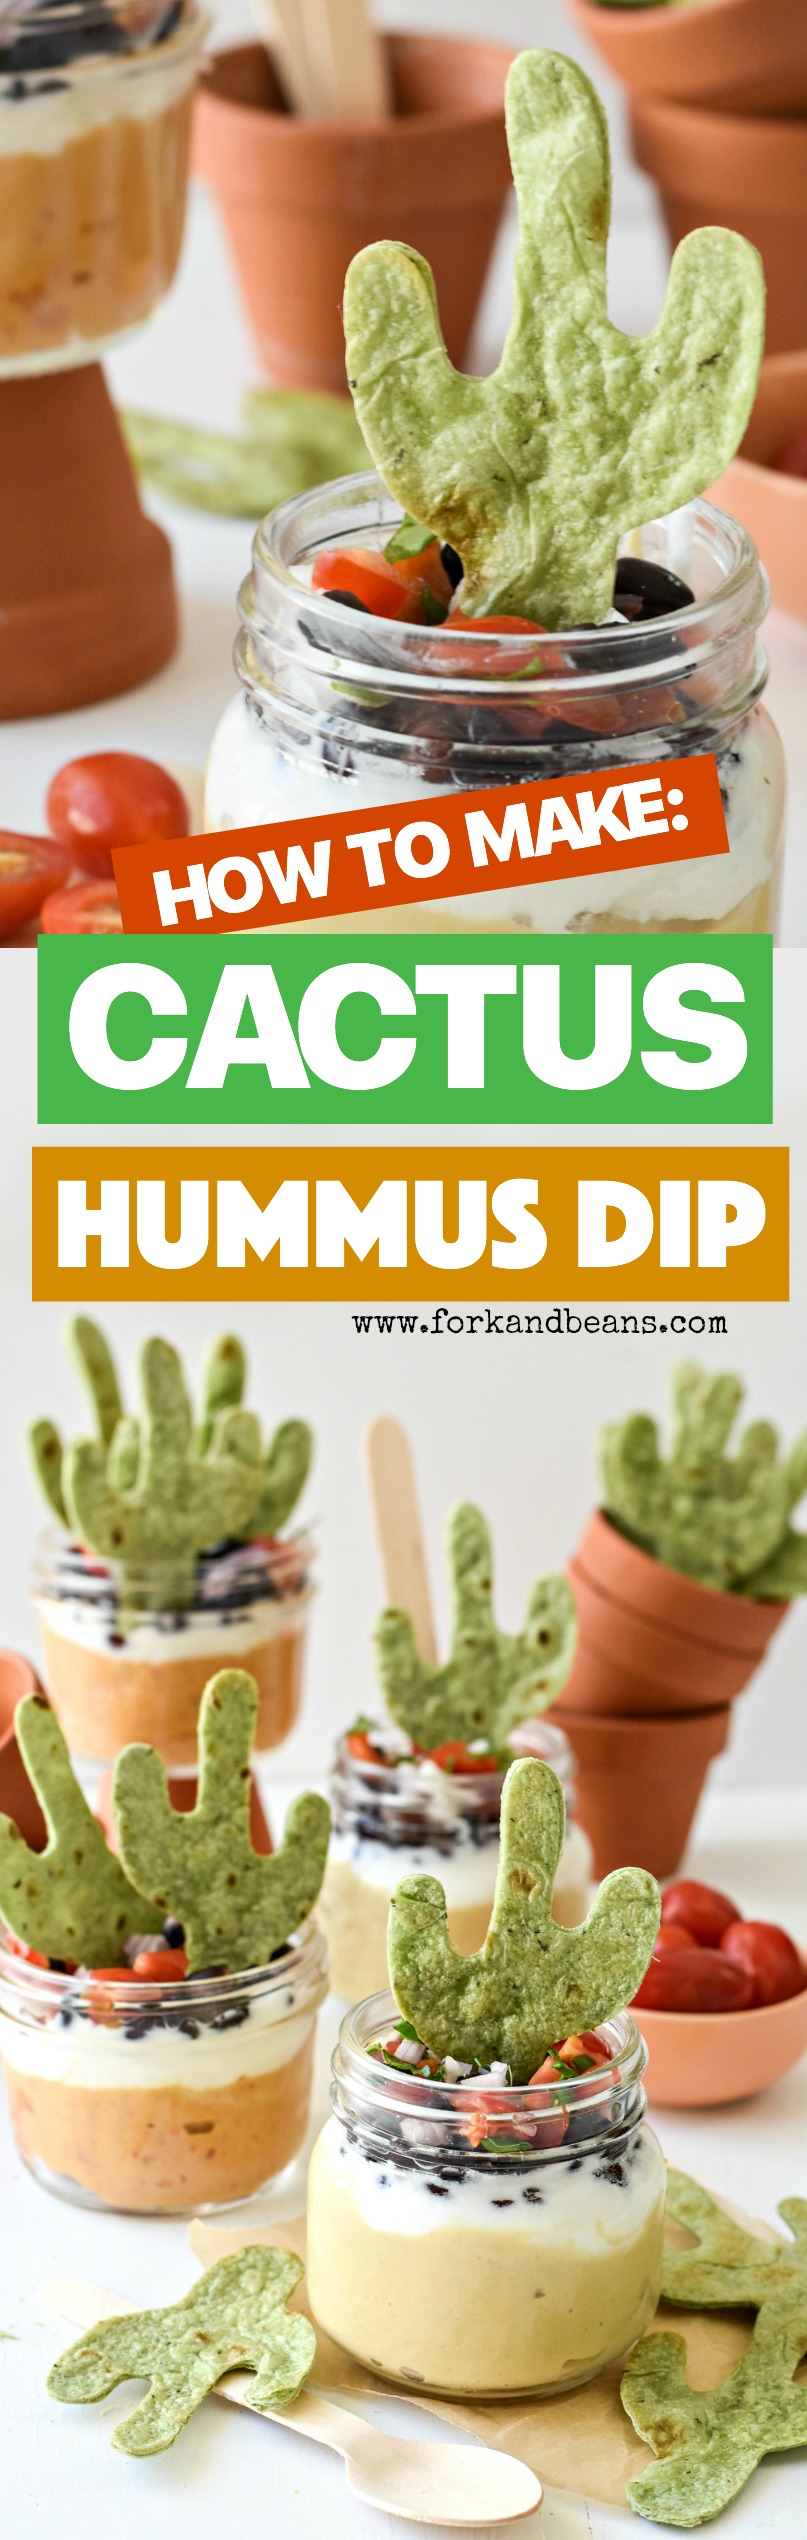 What better way to say thank you to this snacking staple on it's national holiday than with your very own Cactus Hummus Dip?